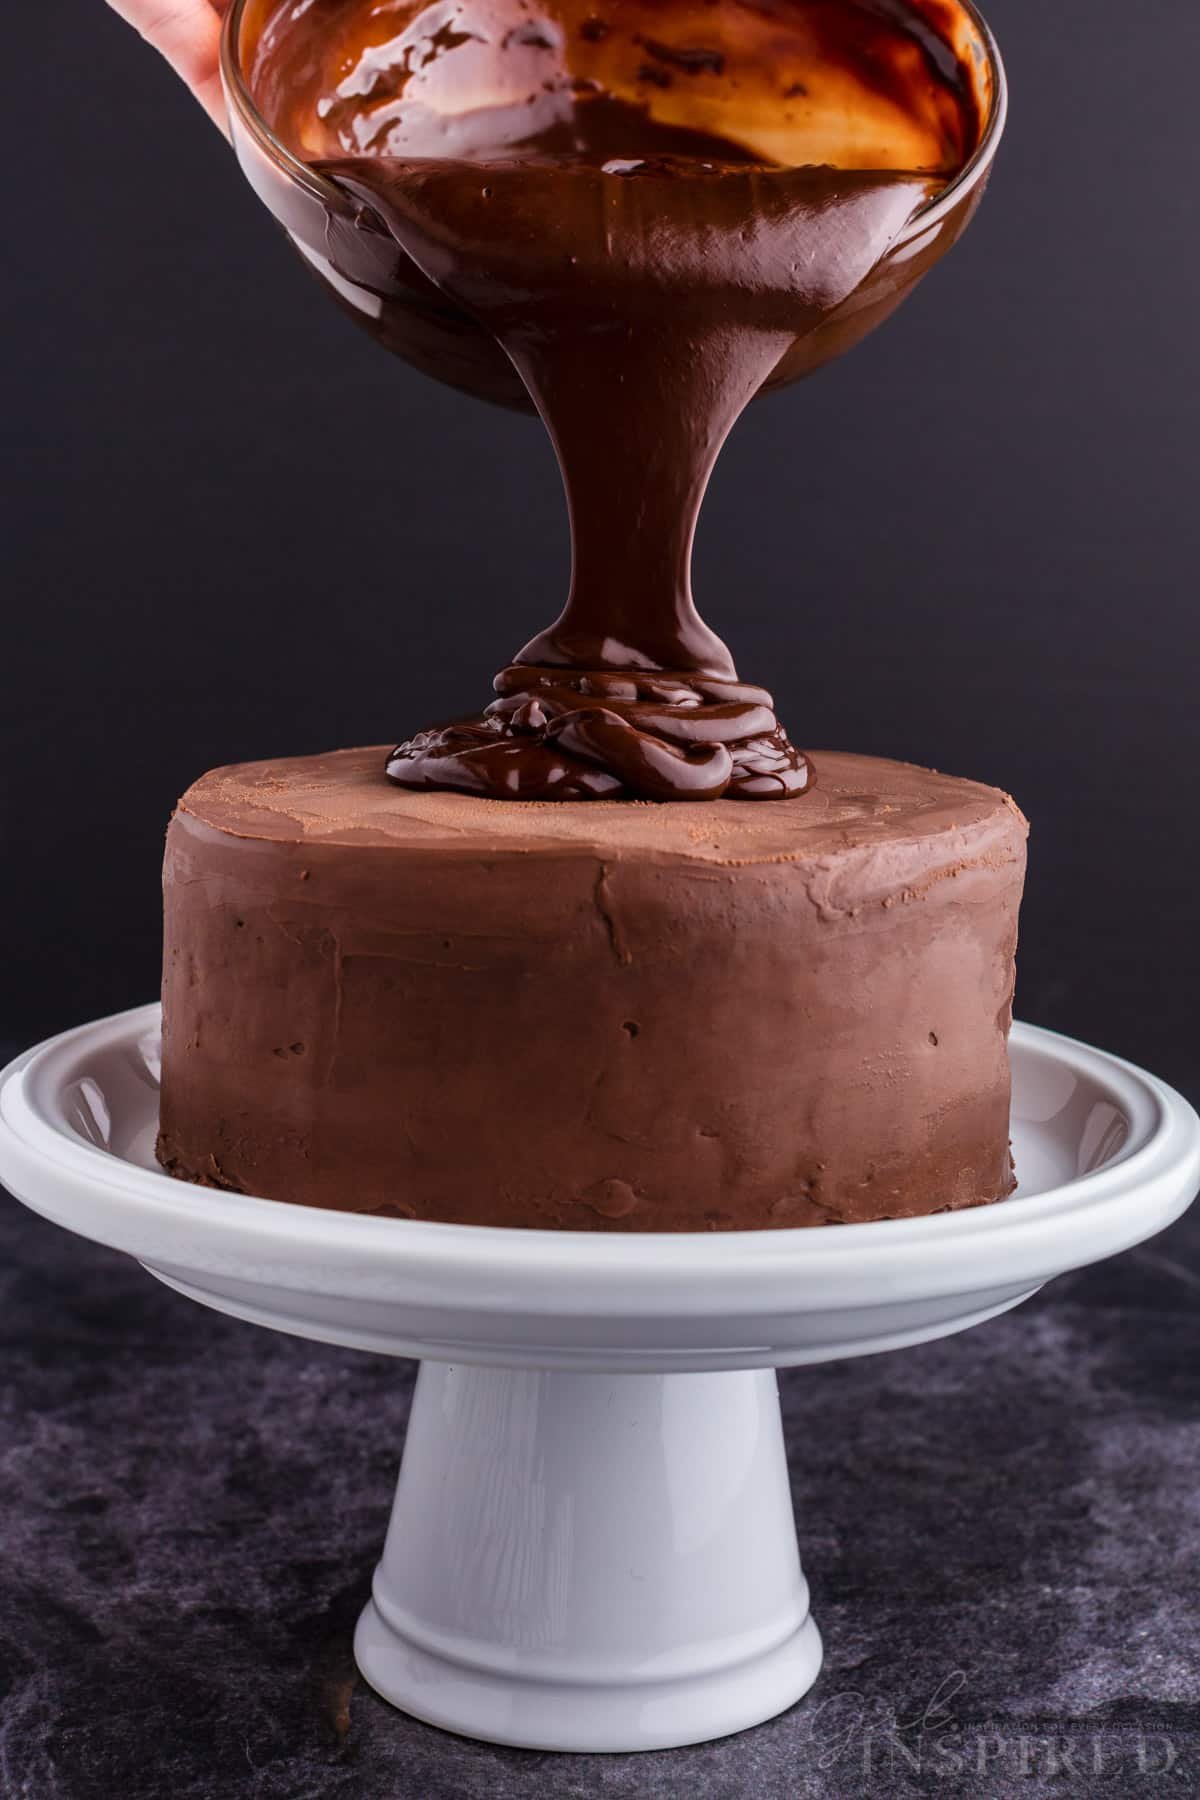 A cake on a tiered tray, Dark Chocolate Ganache poured on top.